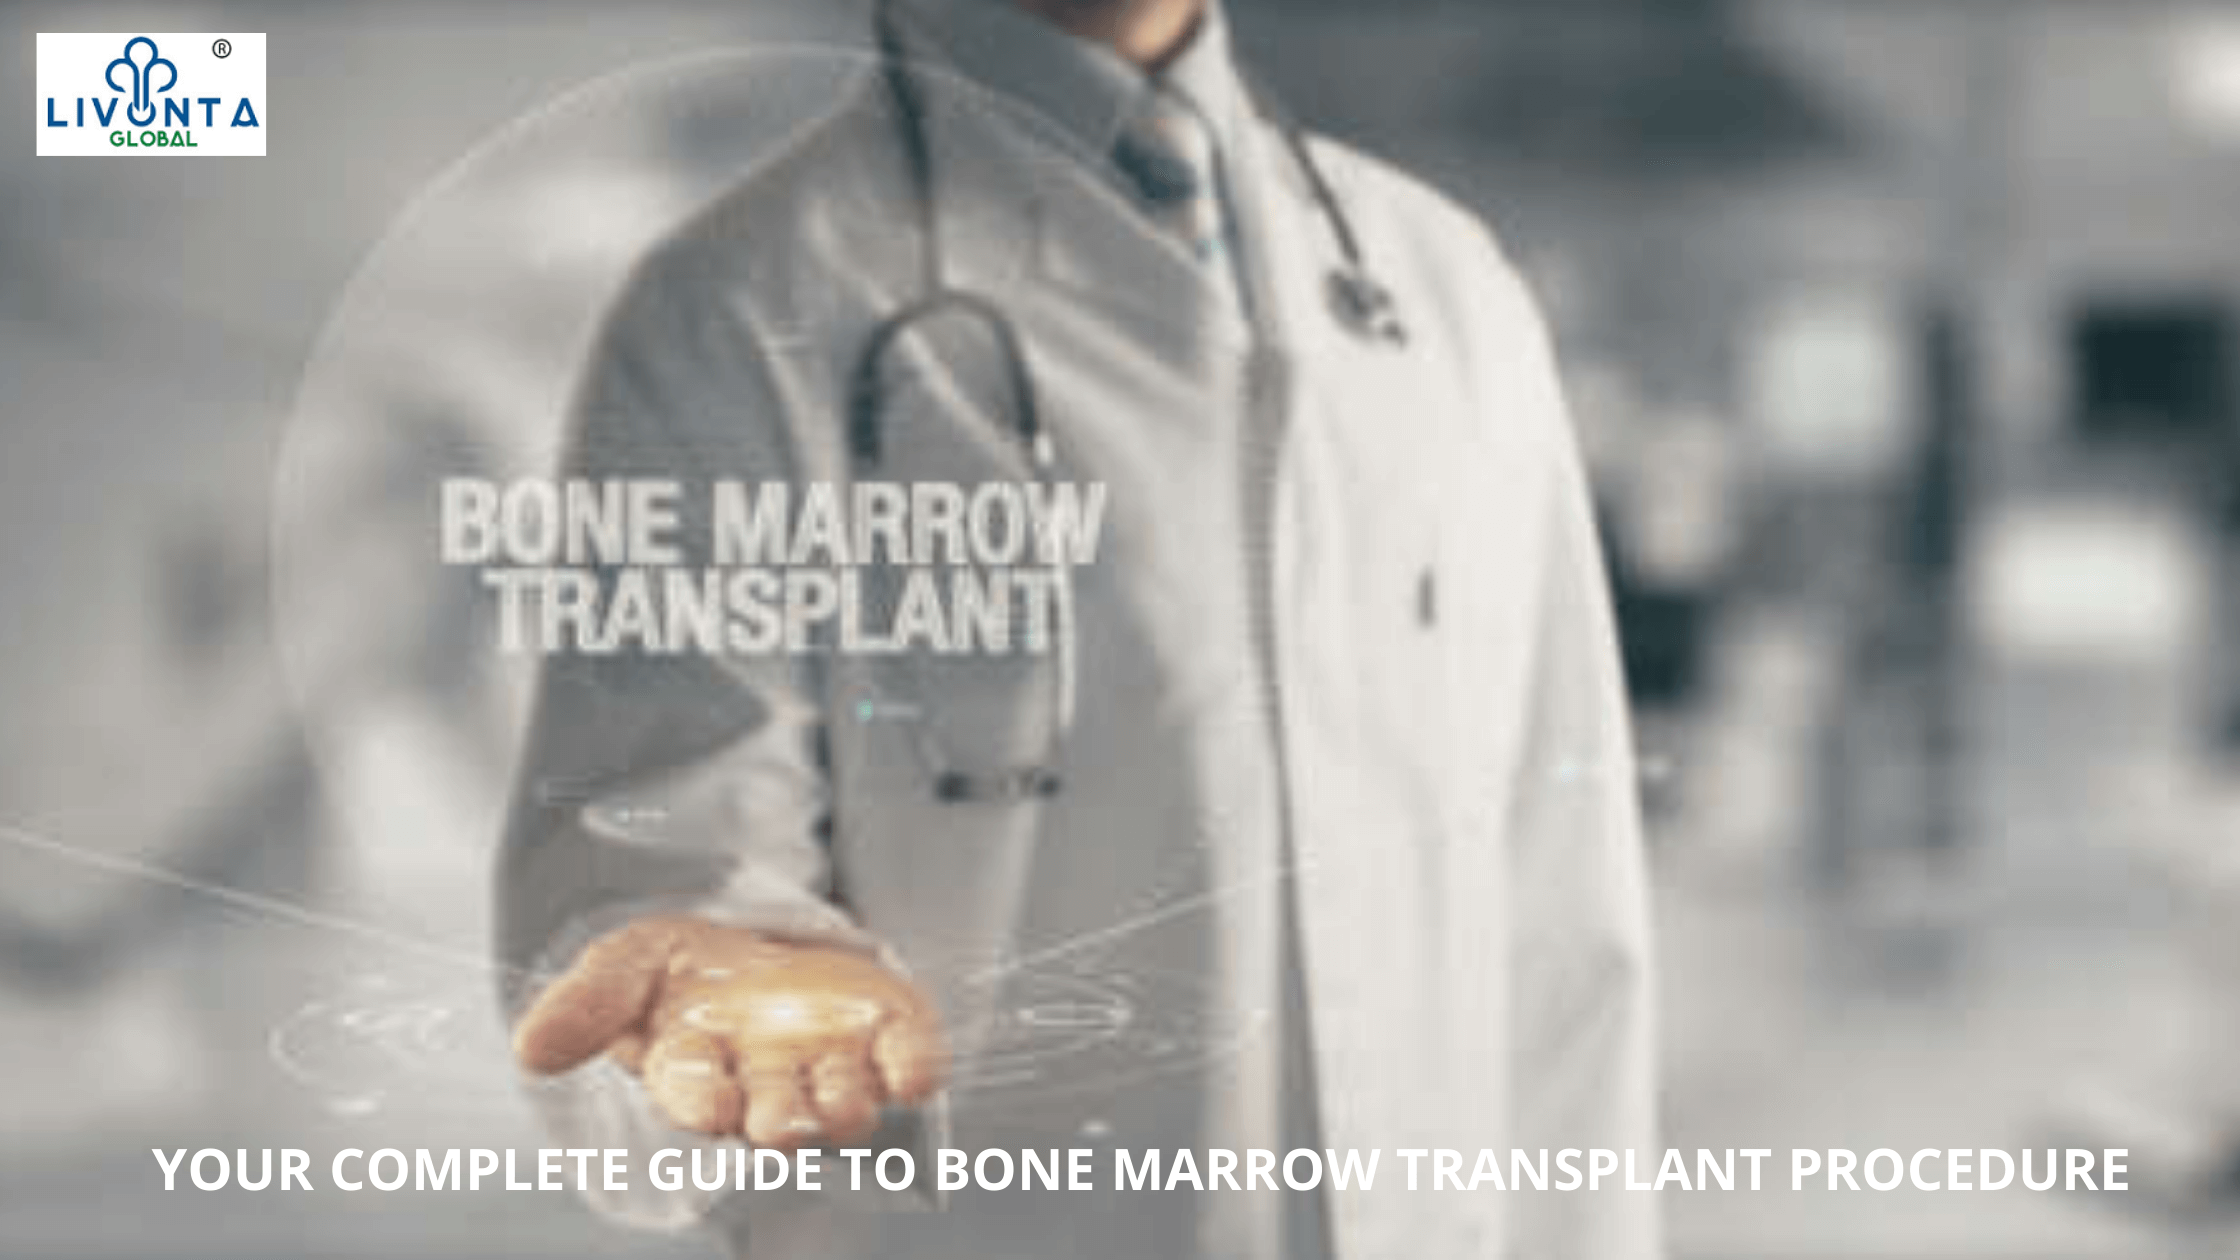 Your complete guide to bone marrow transplant procedure